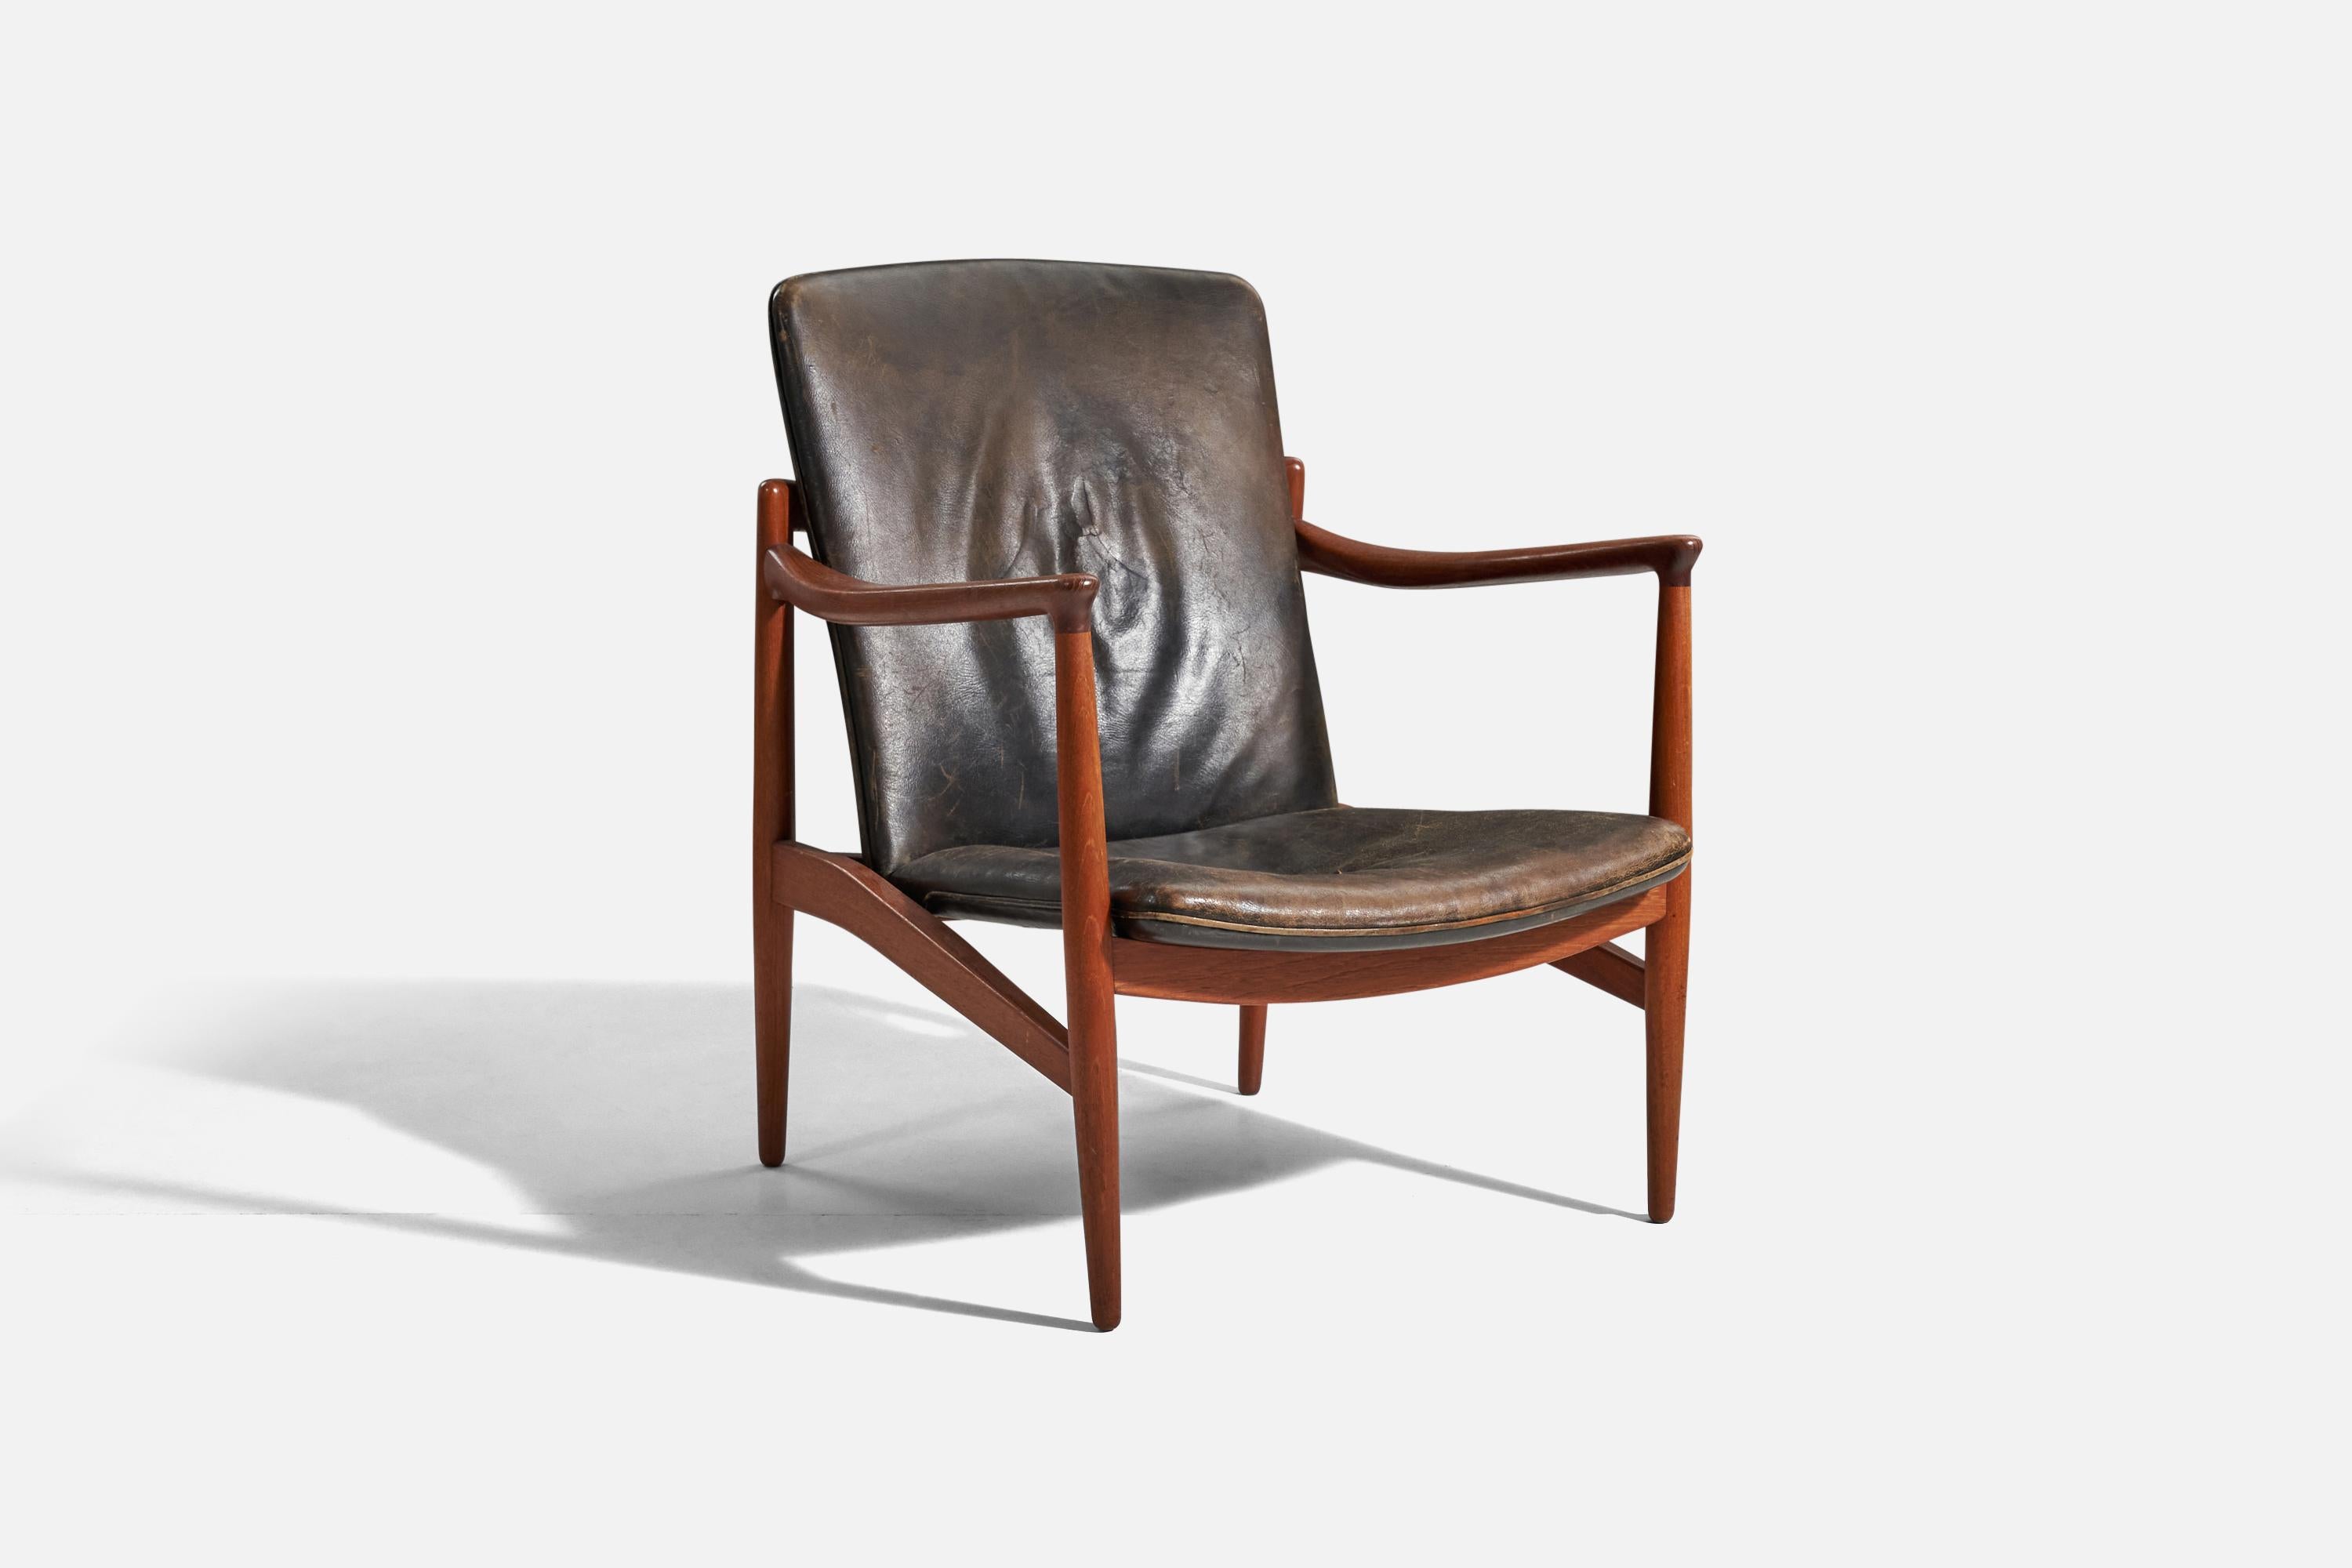 An adjustable, teak and leather lounge chair designed and produced by Jacob Kjaer, Denmark, 1945.